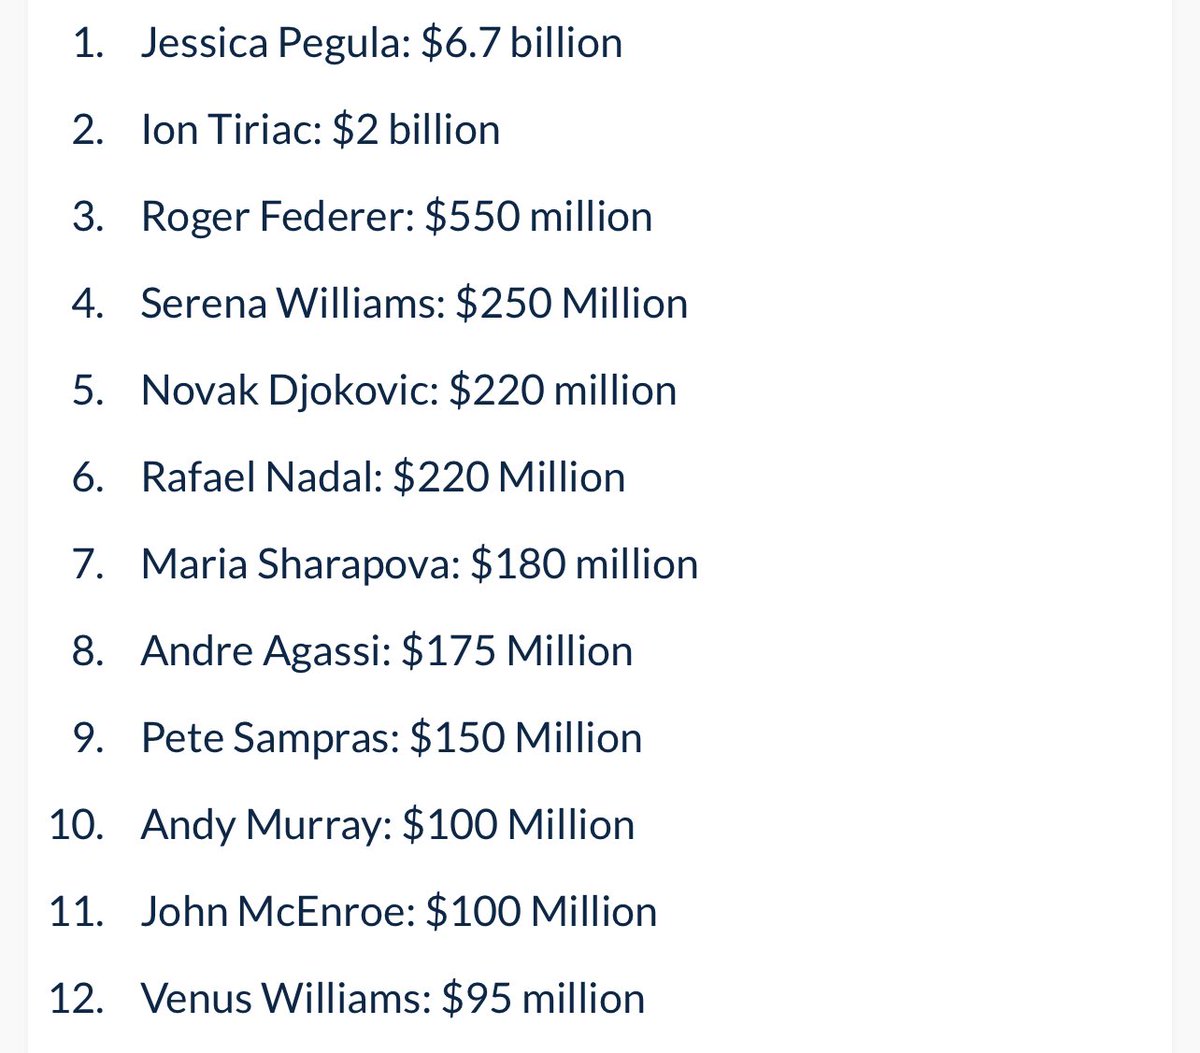 #Goodmorning … With a net worth of $6.7 billion, Jessica Pegula is the richest tennis player in the world in 2023. The 28-year-old from Buffalo, New York, is worth more than Roger Federer, Serena Williams, Novak Djokovic, and Rafael Nadal combined. #tennis #sport #JessicaPegula